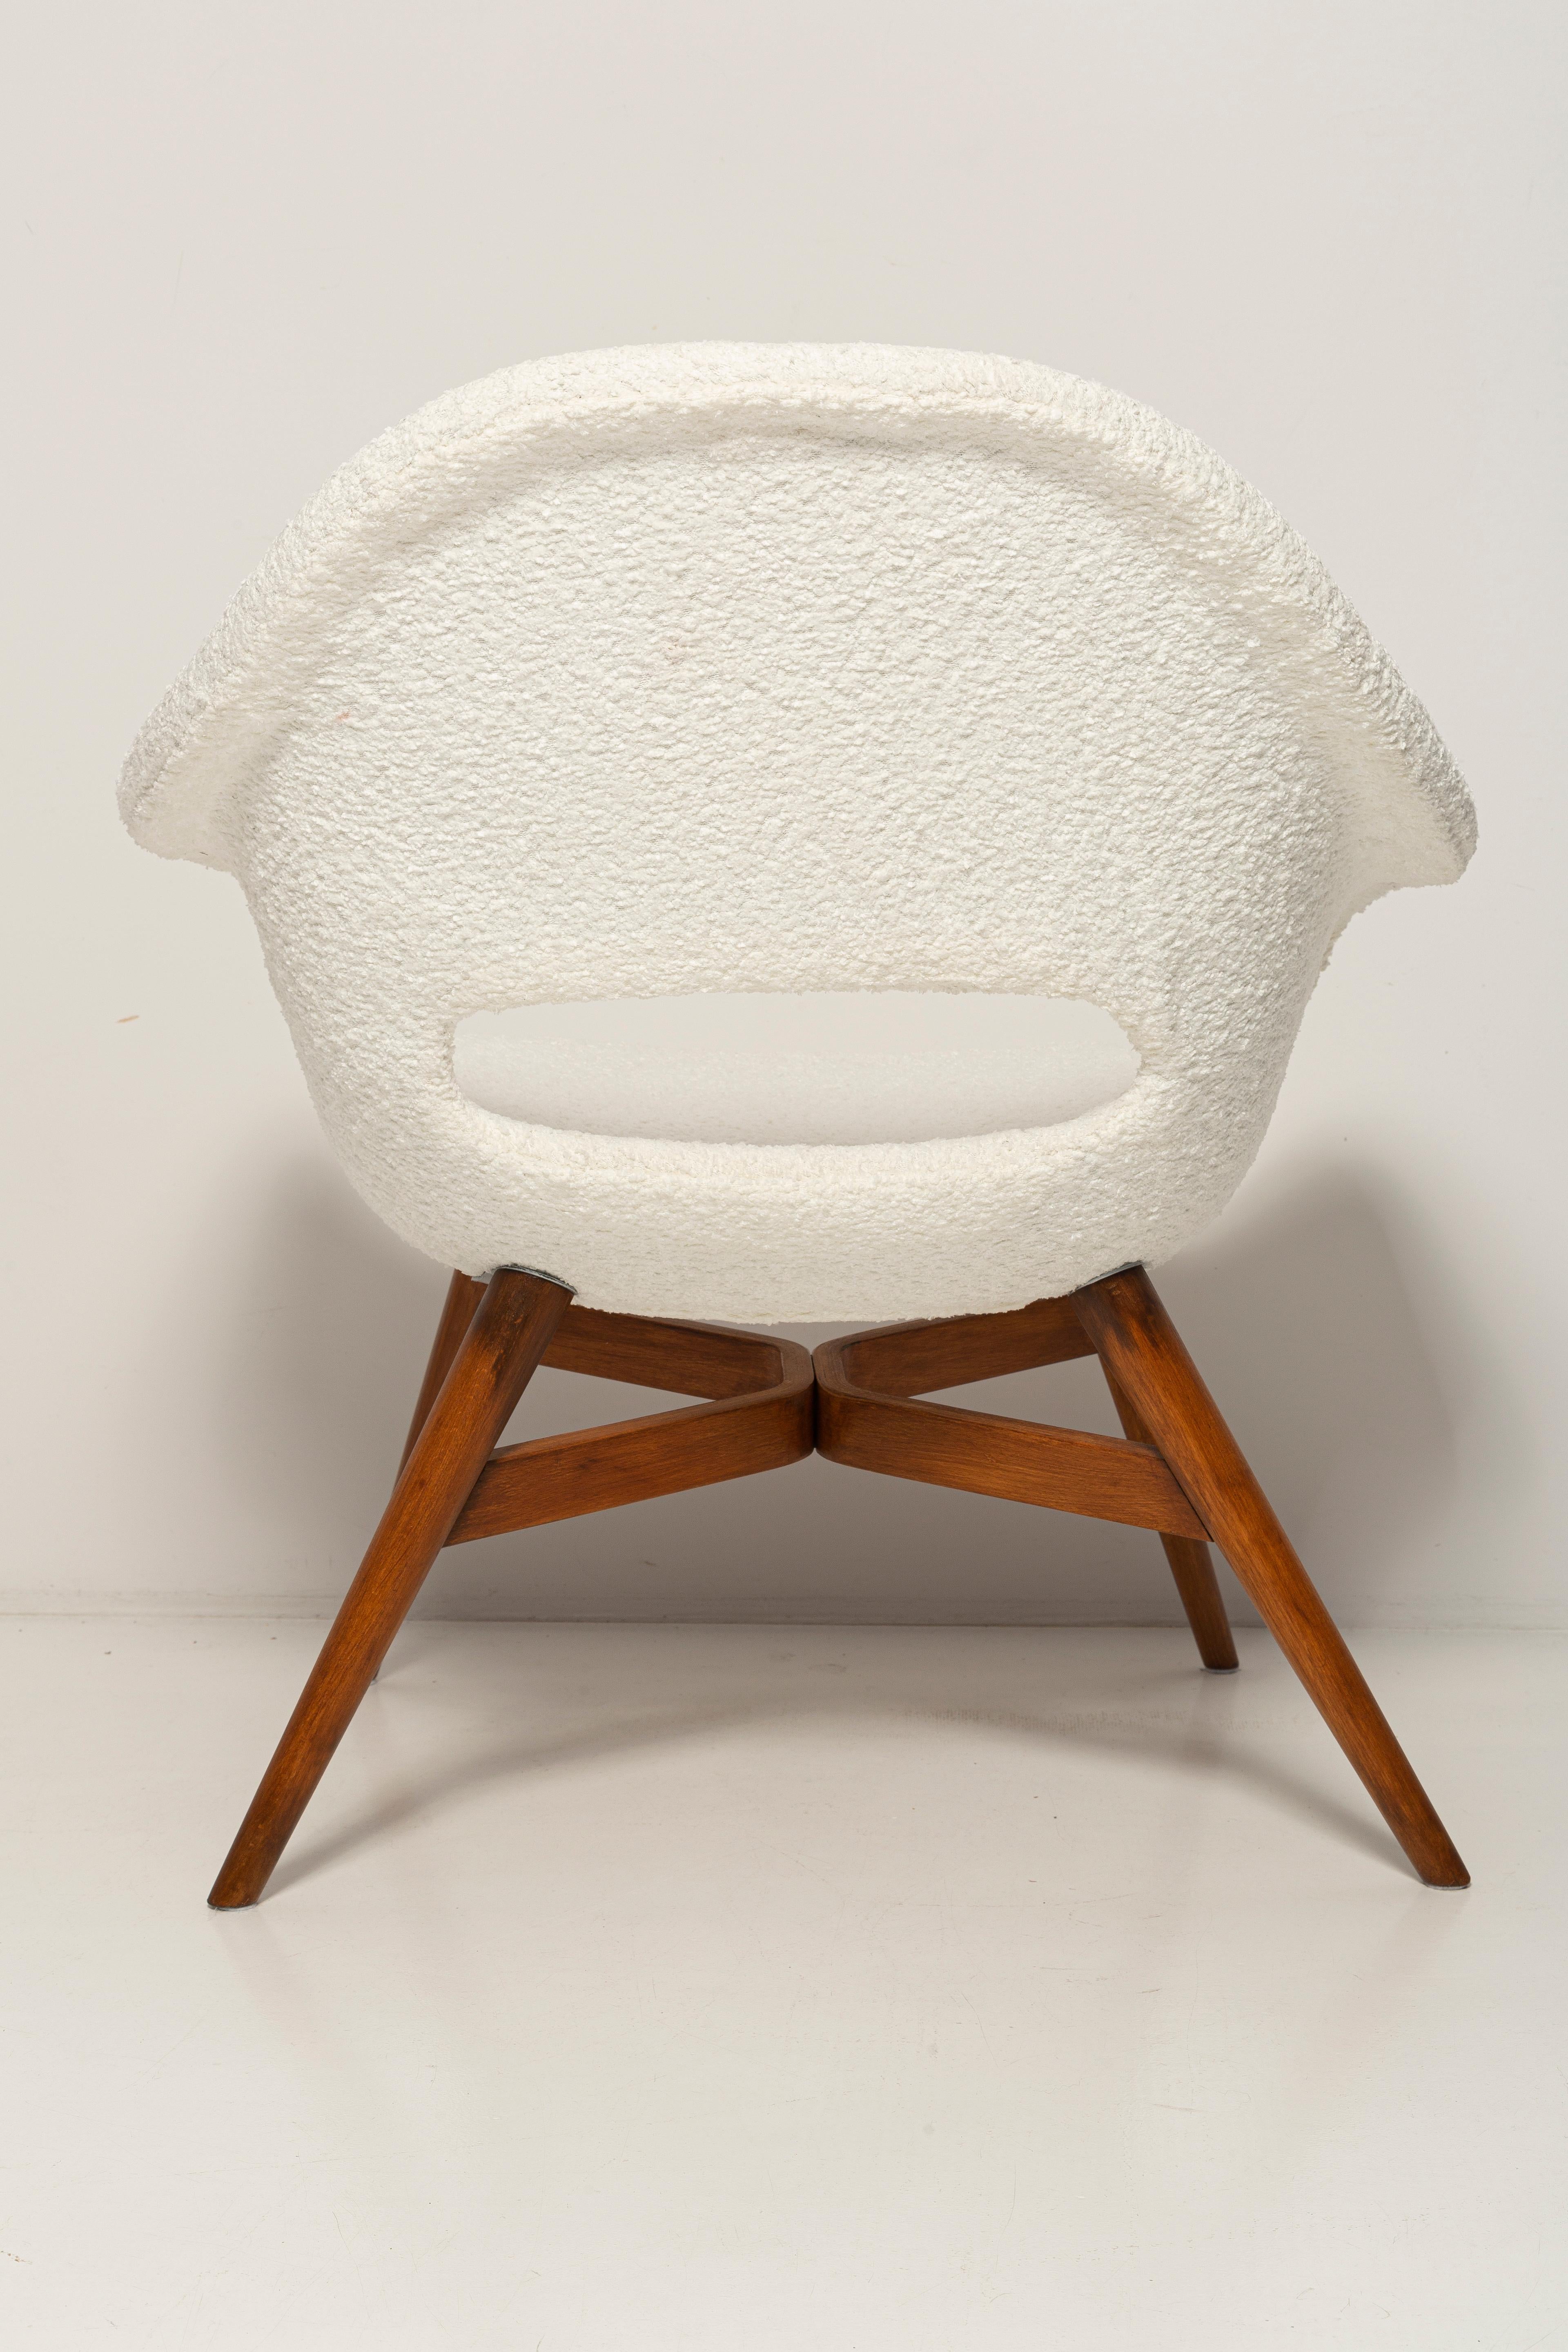 Set of 2 Mid Century White Boucle Shell Chairs, M Navratil, Czechoslovakia, 1960 For Sale 5